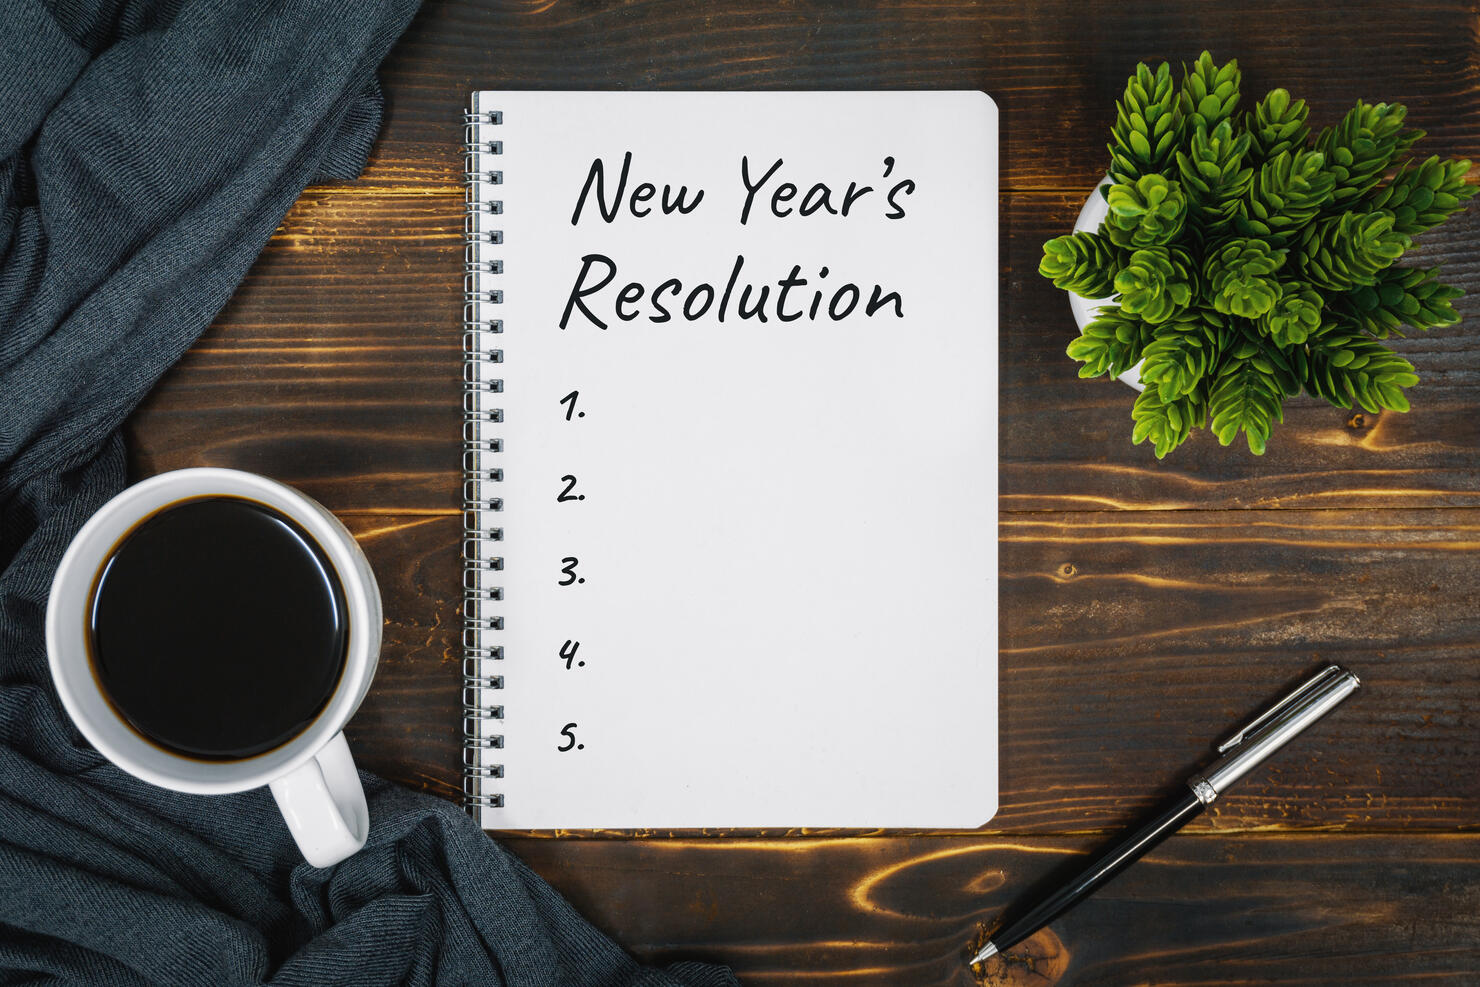 New Year's Resolution on Notebook Page Over Rustic Wood